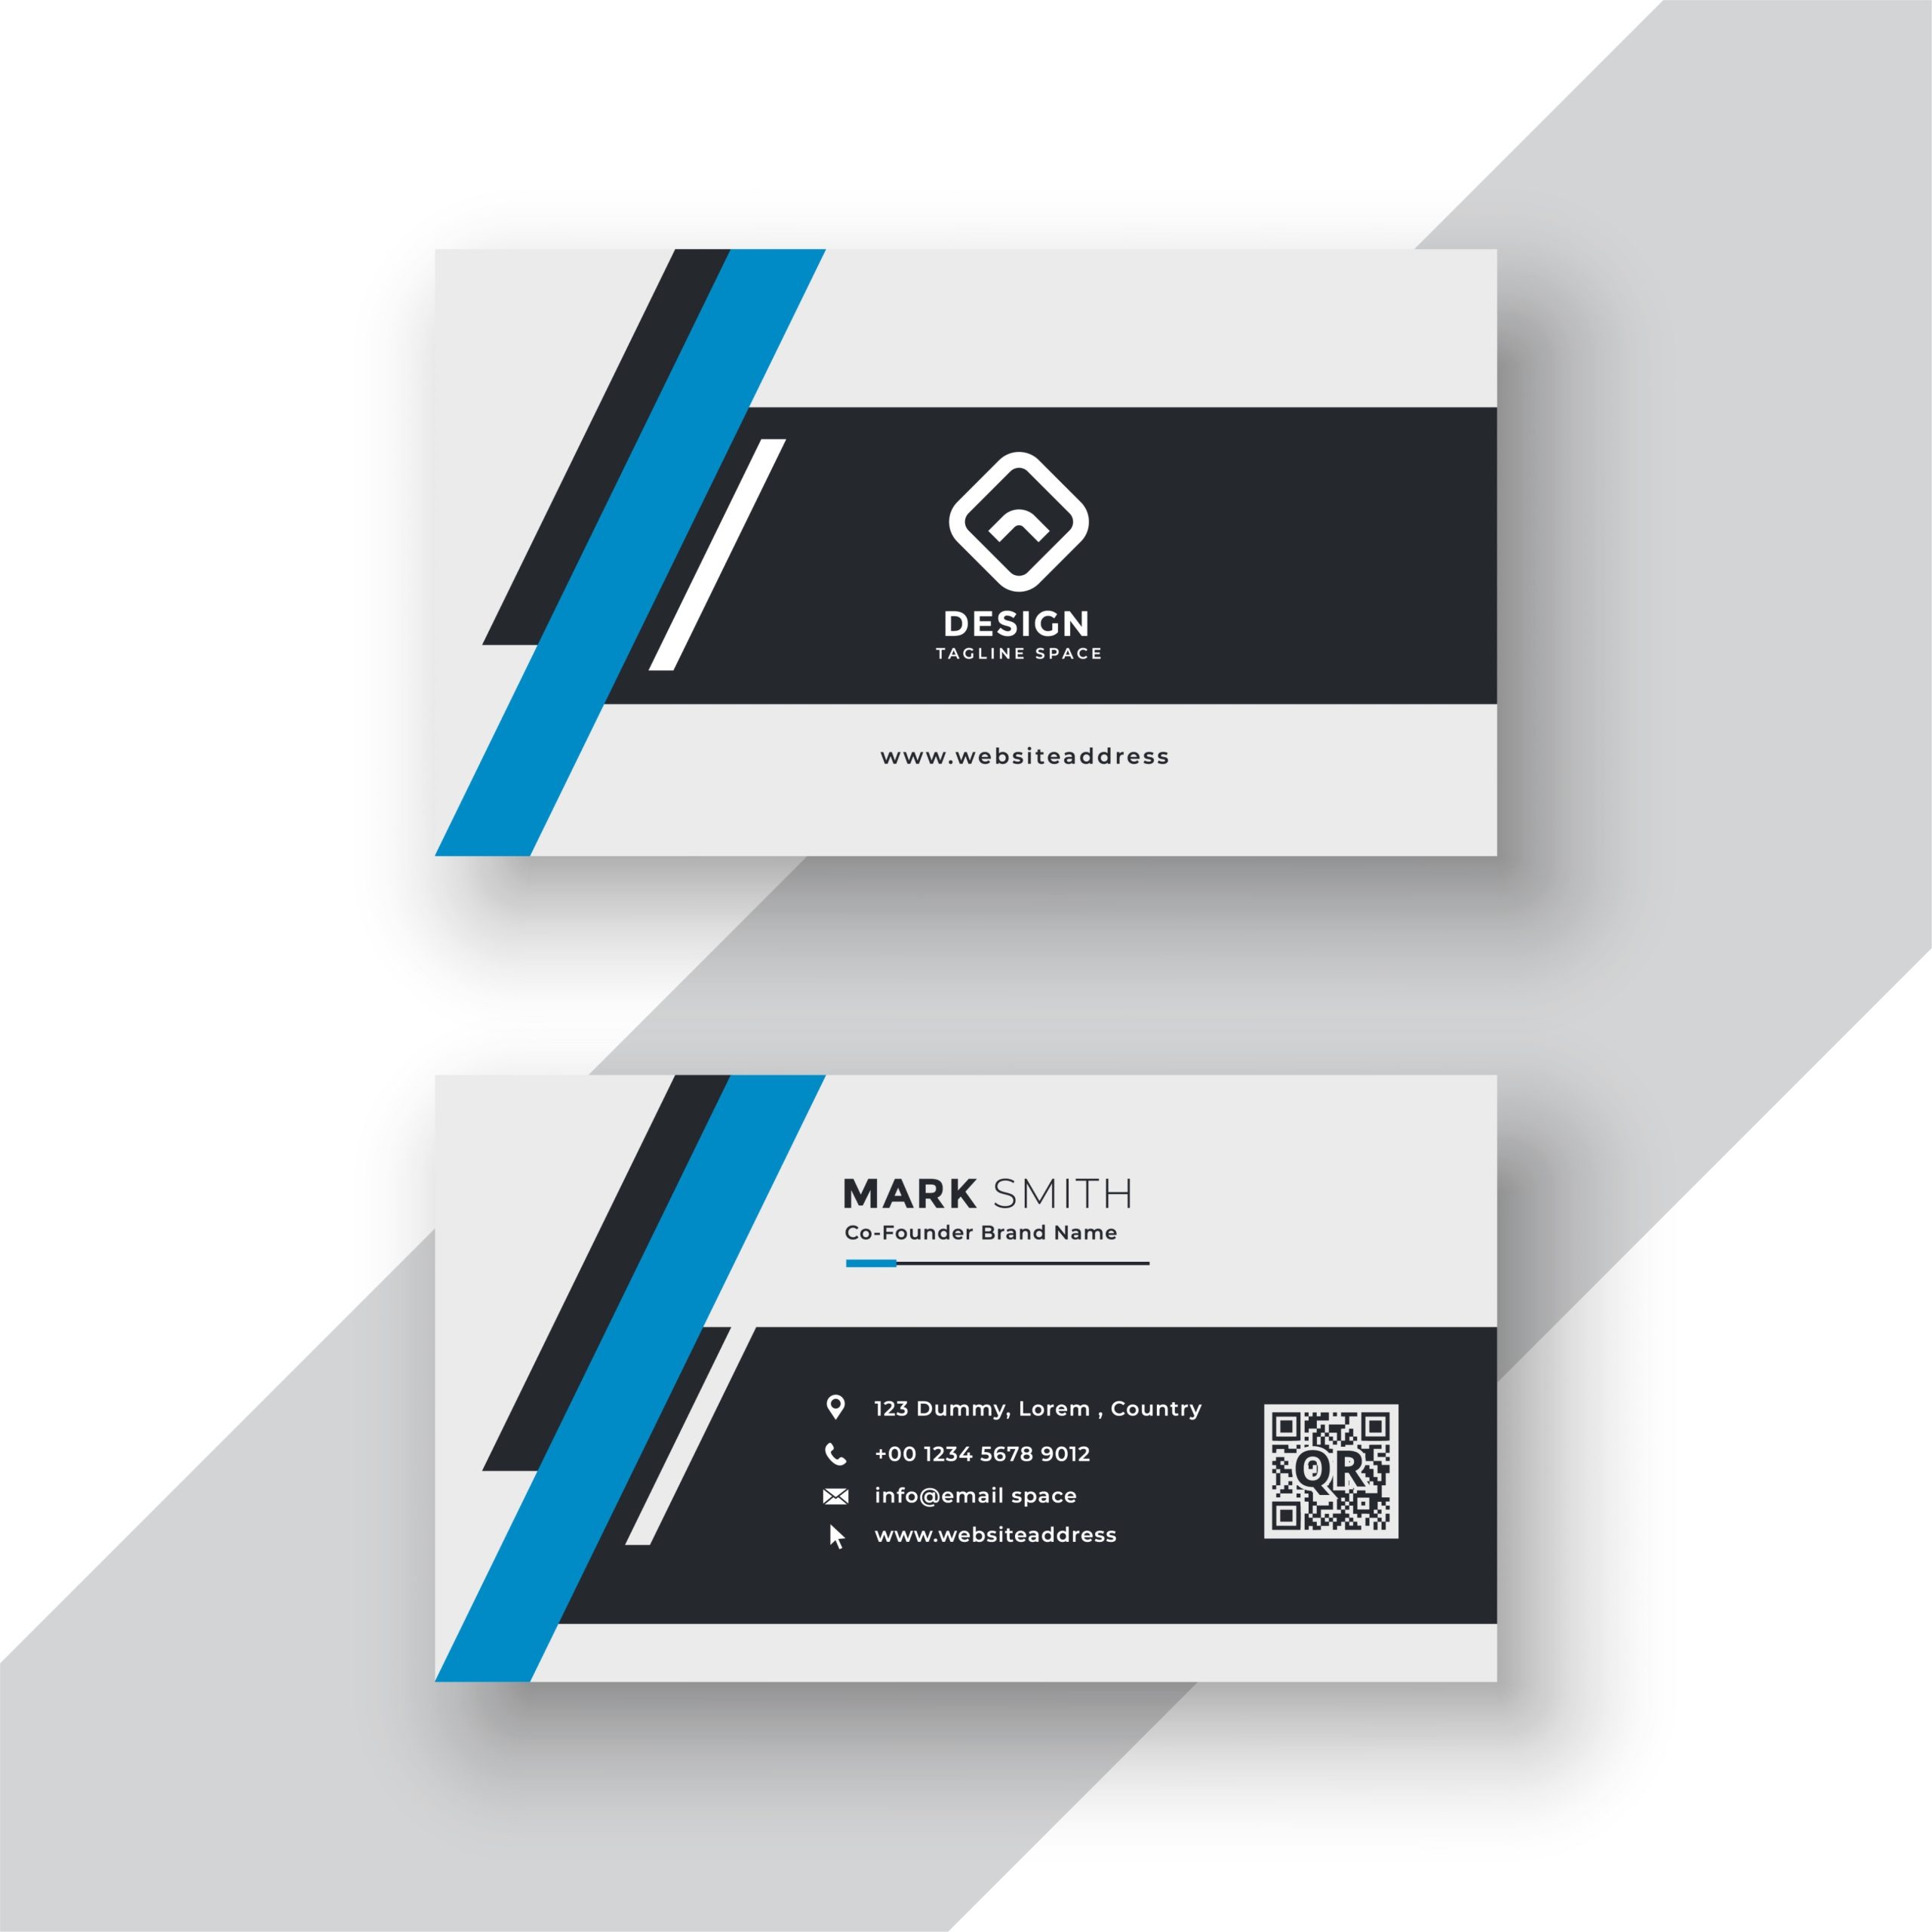 Modern Professional Business Card Template Design – Download Free Vector Art, Stock Graphics Pertaining To Visiting Card Templates Download